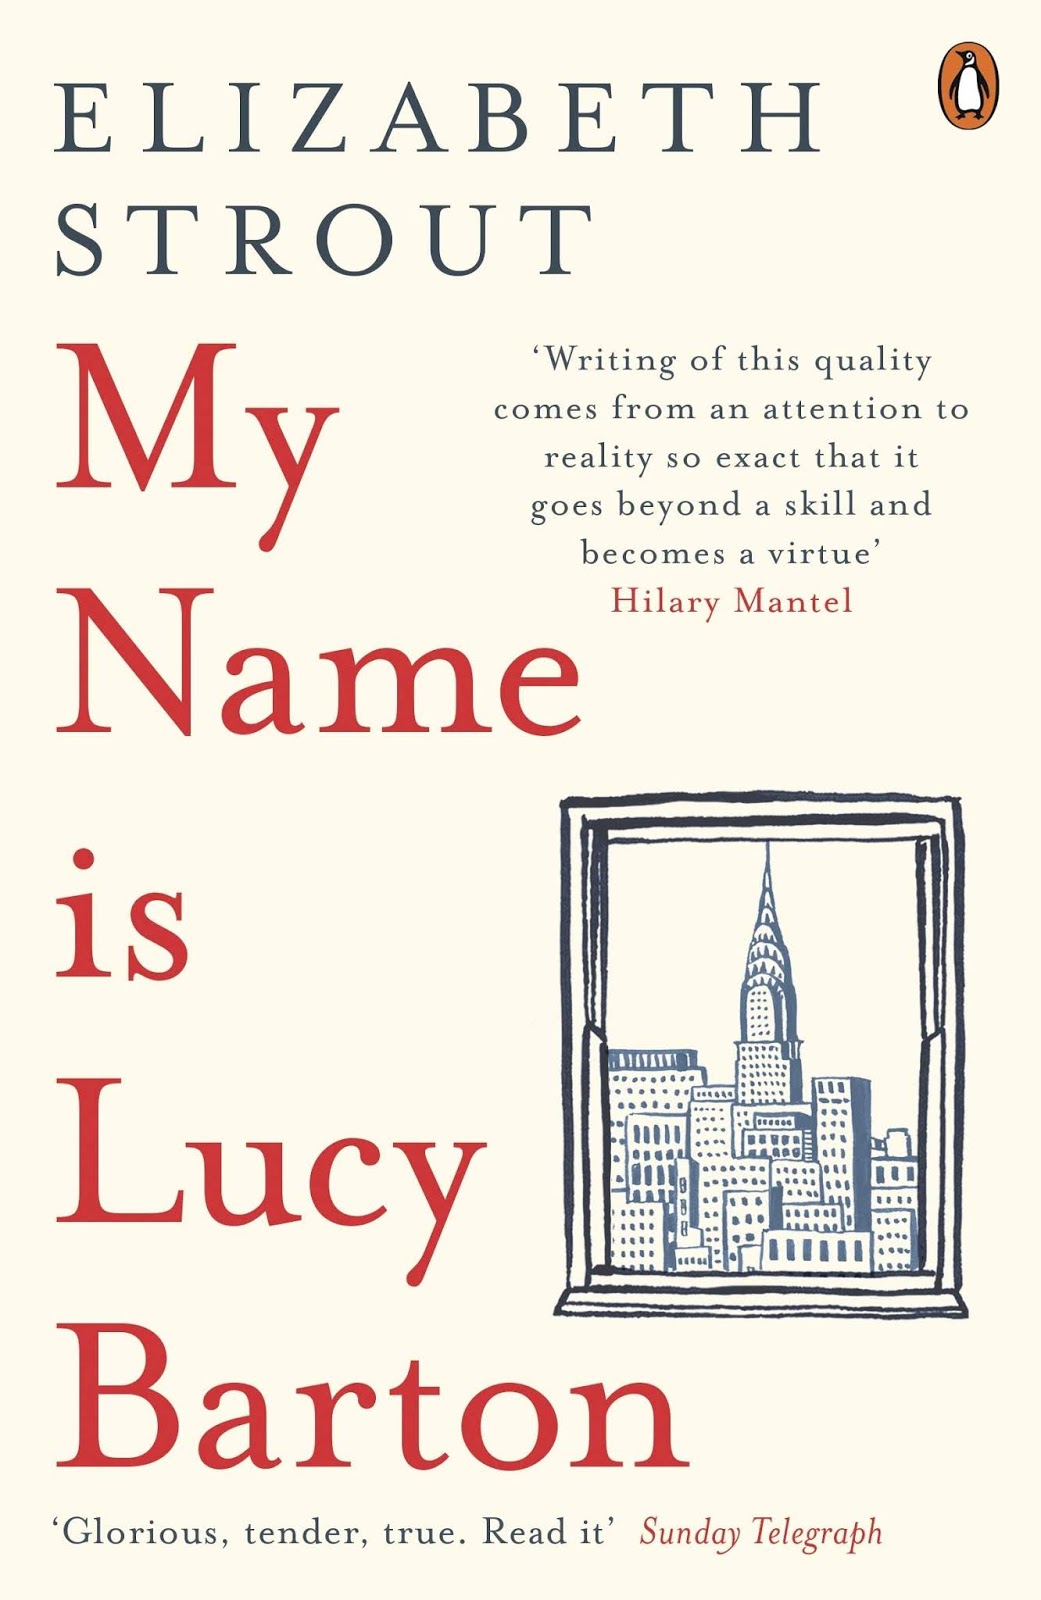 ny times book review my name is lucy barton